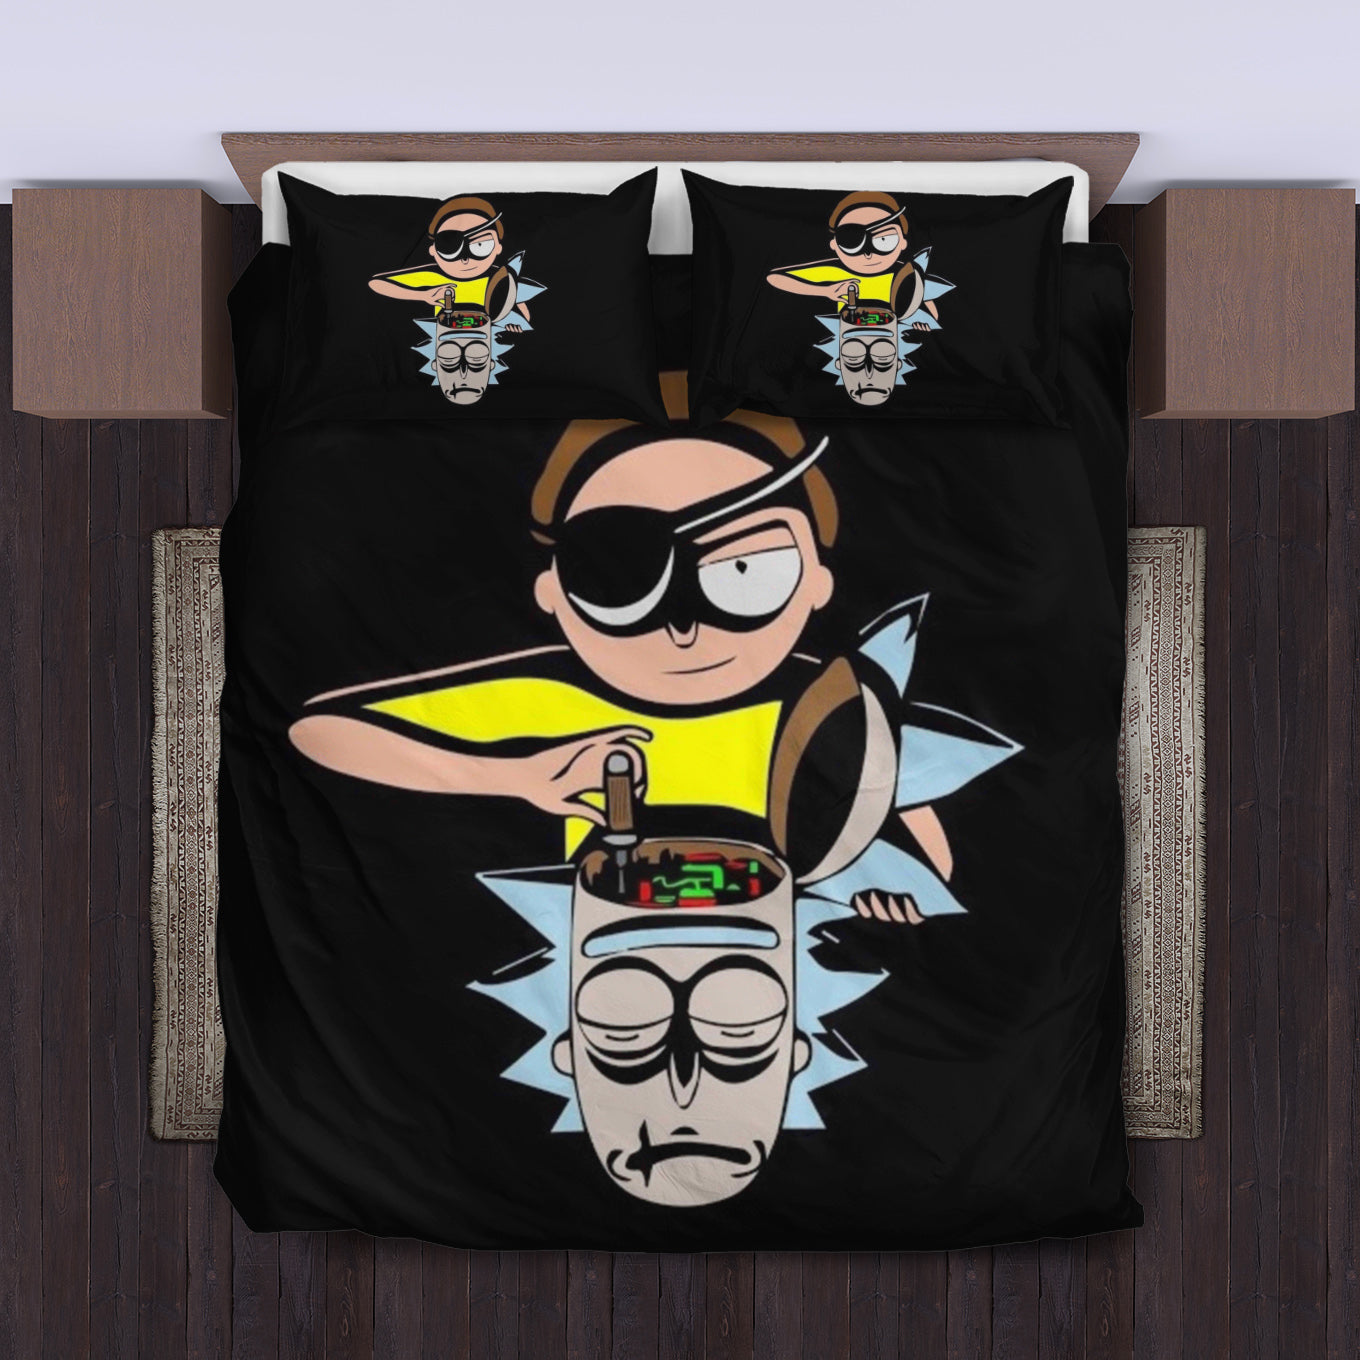 Rick And Morty Bedding Set 6 Duvet Cover And Pillowcase Set